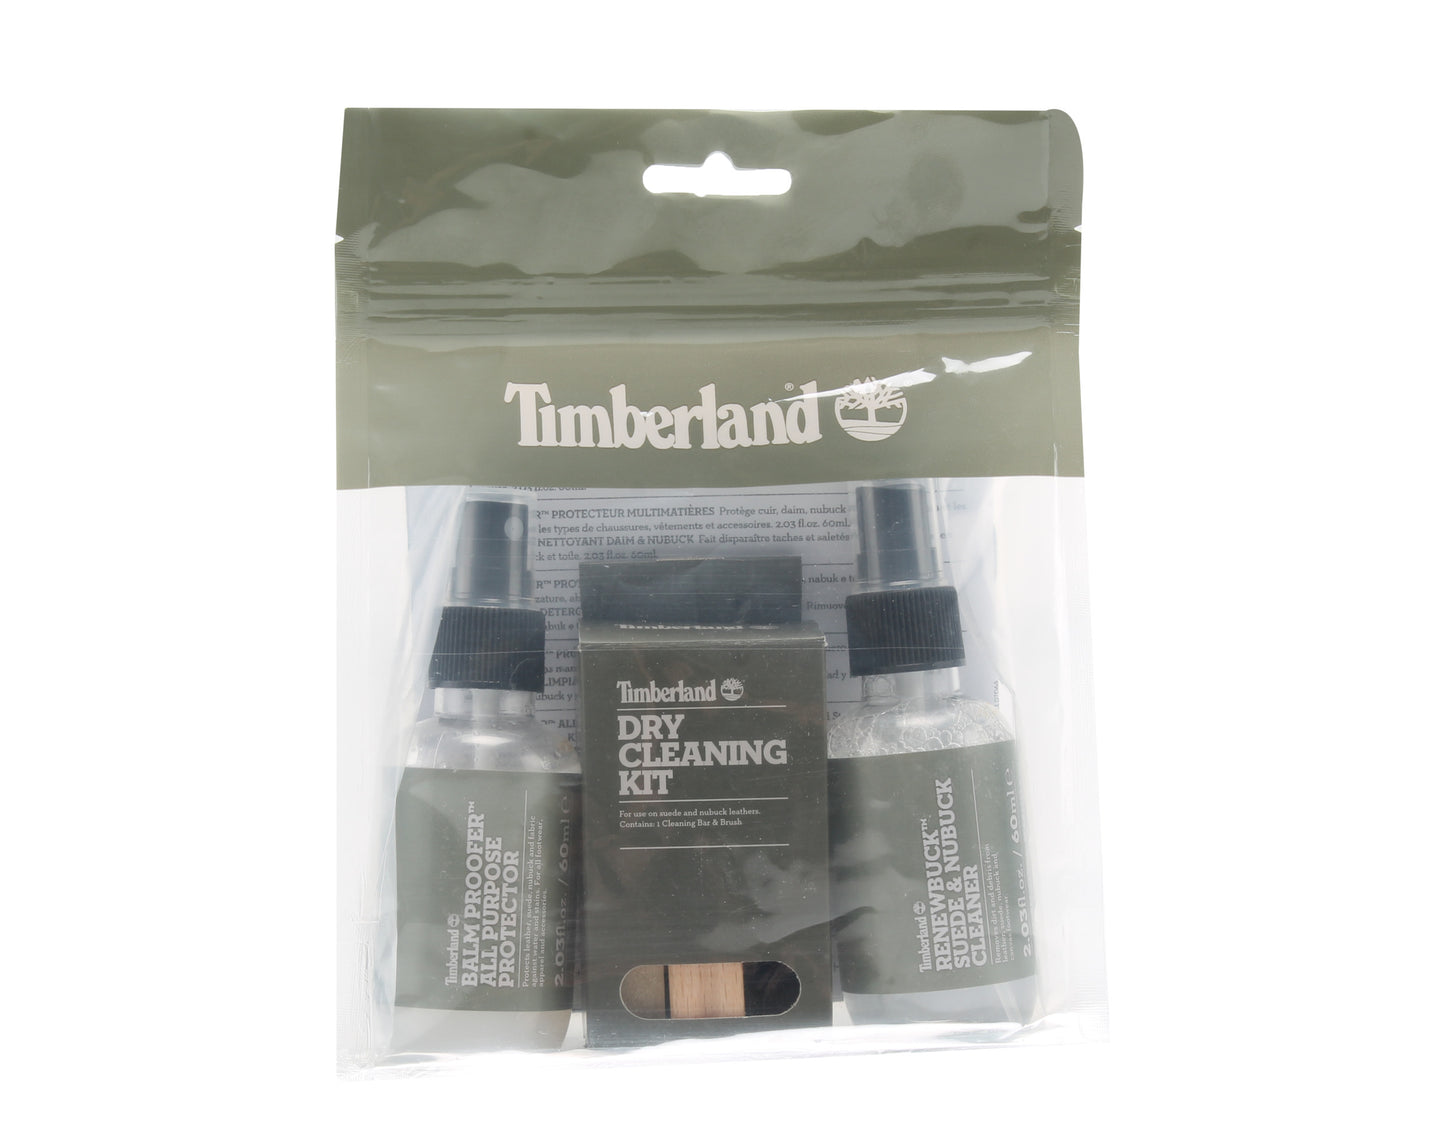 Timberland Dry Cleaning Kit – DTLR